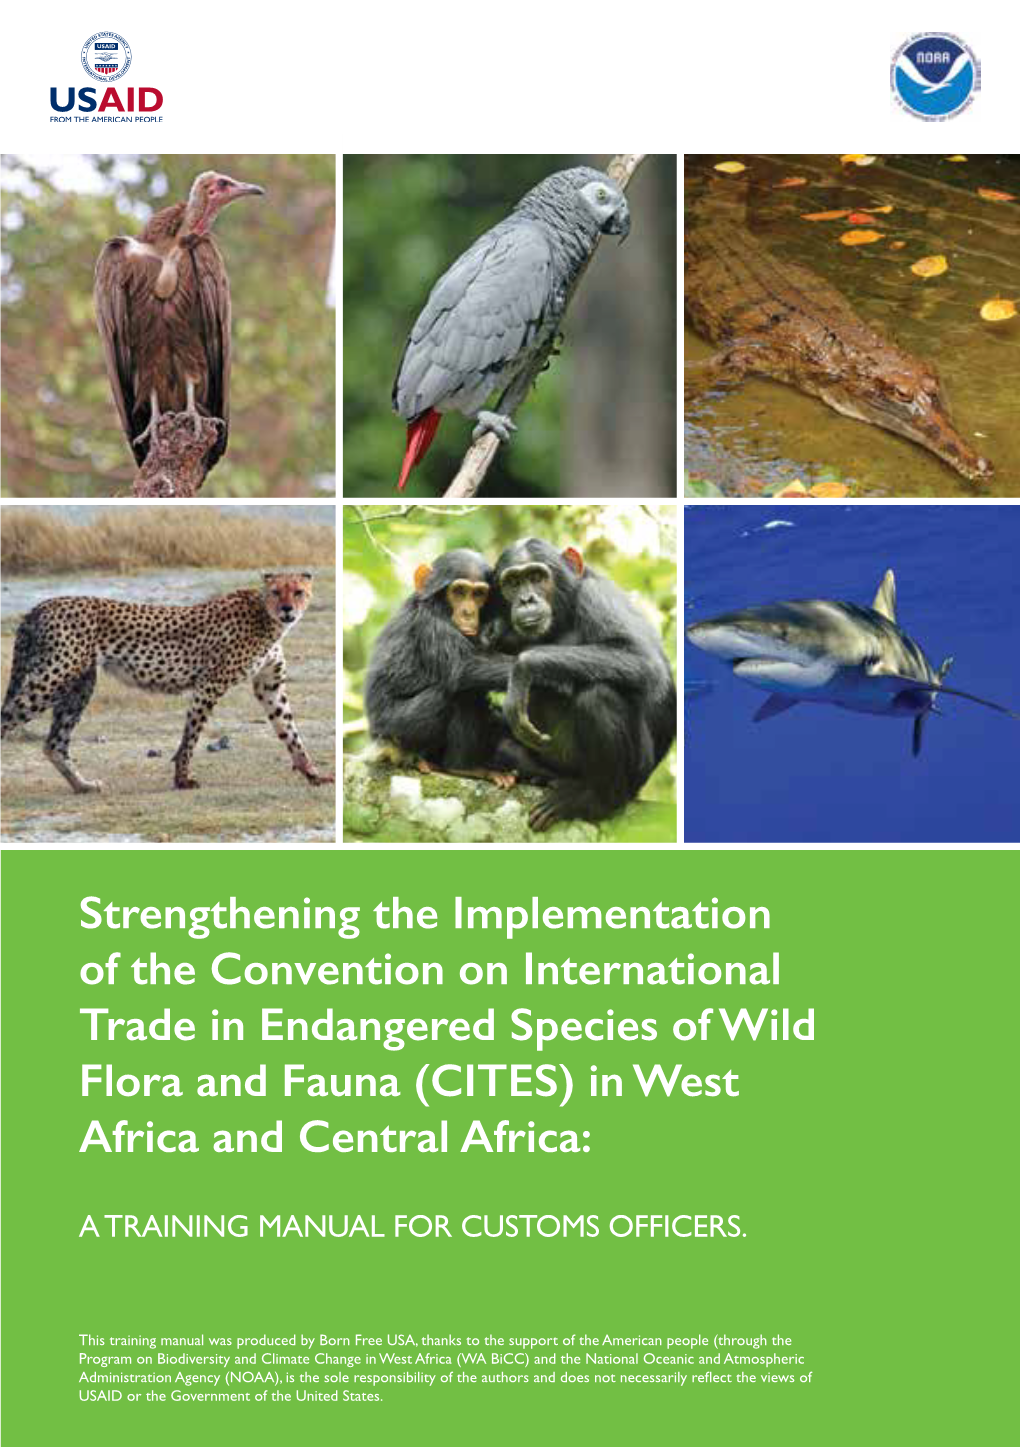 Strengthening the Implementation of the Convention on International Trade in Endangered Species of Wild Flora and Fauna (CITES) in West Africa and Central Africa